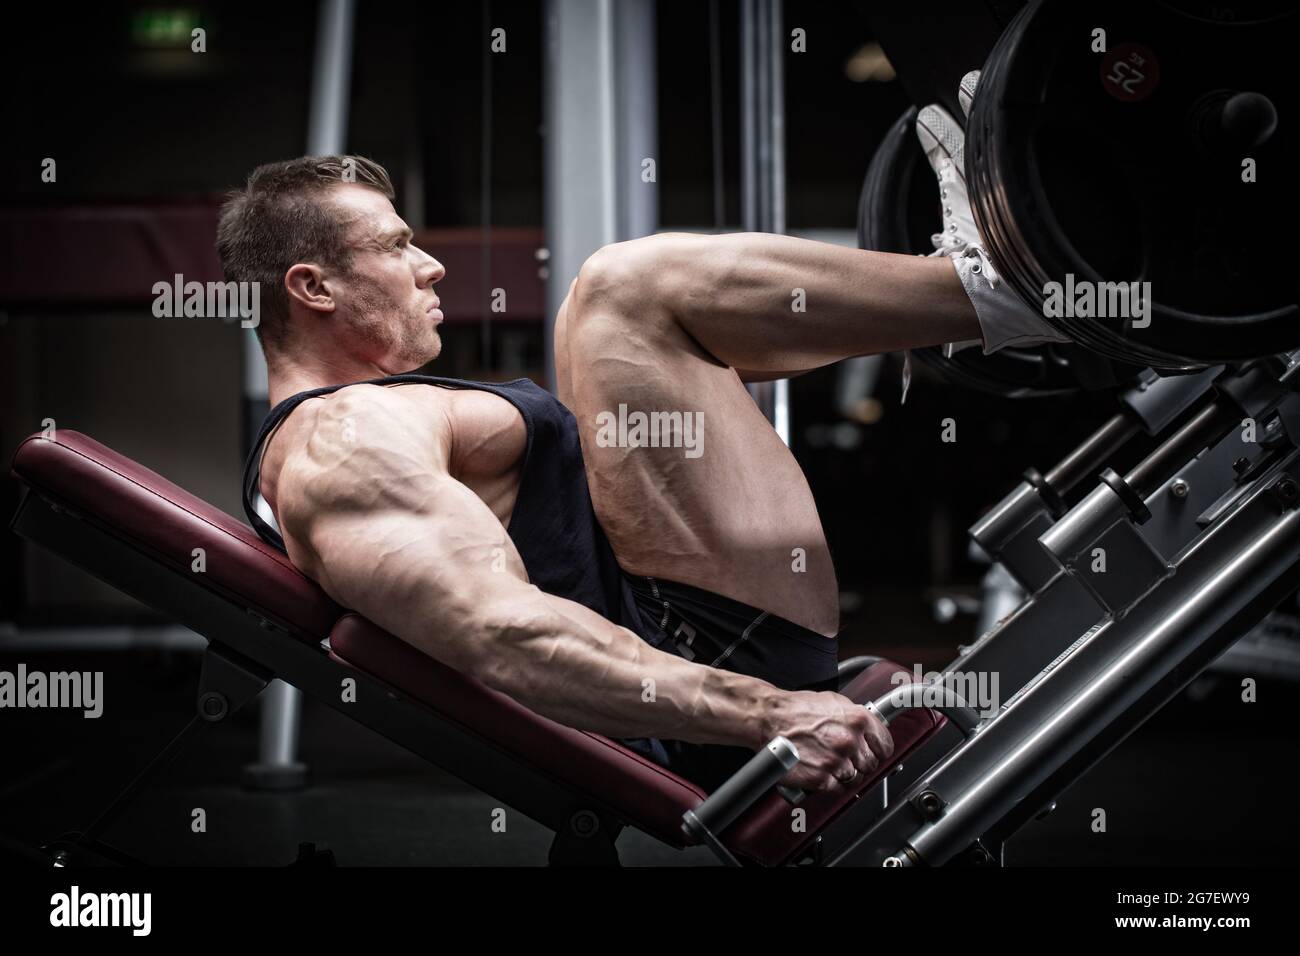 Man in gym training at leg press to define his upper leg muscles Stock  Photo - Alamy